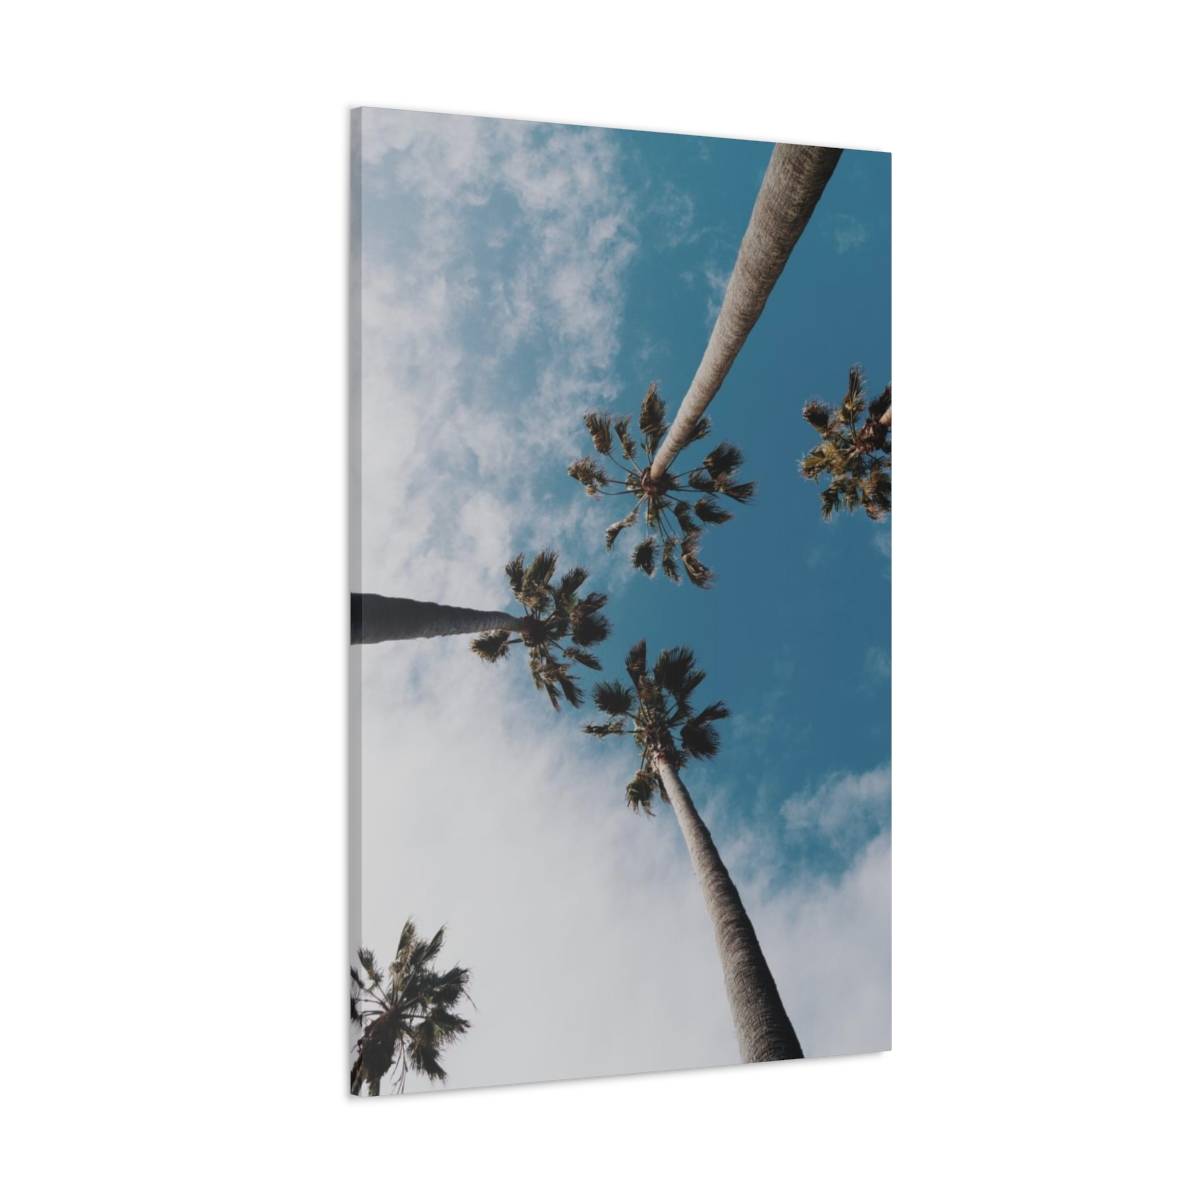 Photography of coconut trees